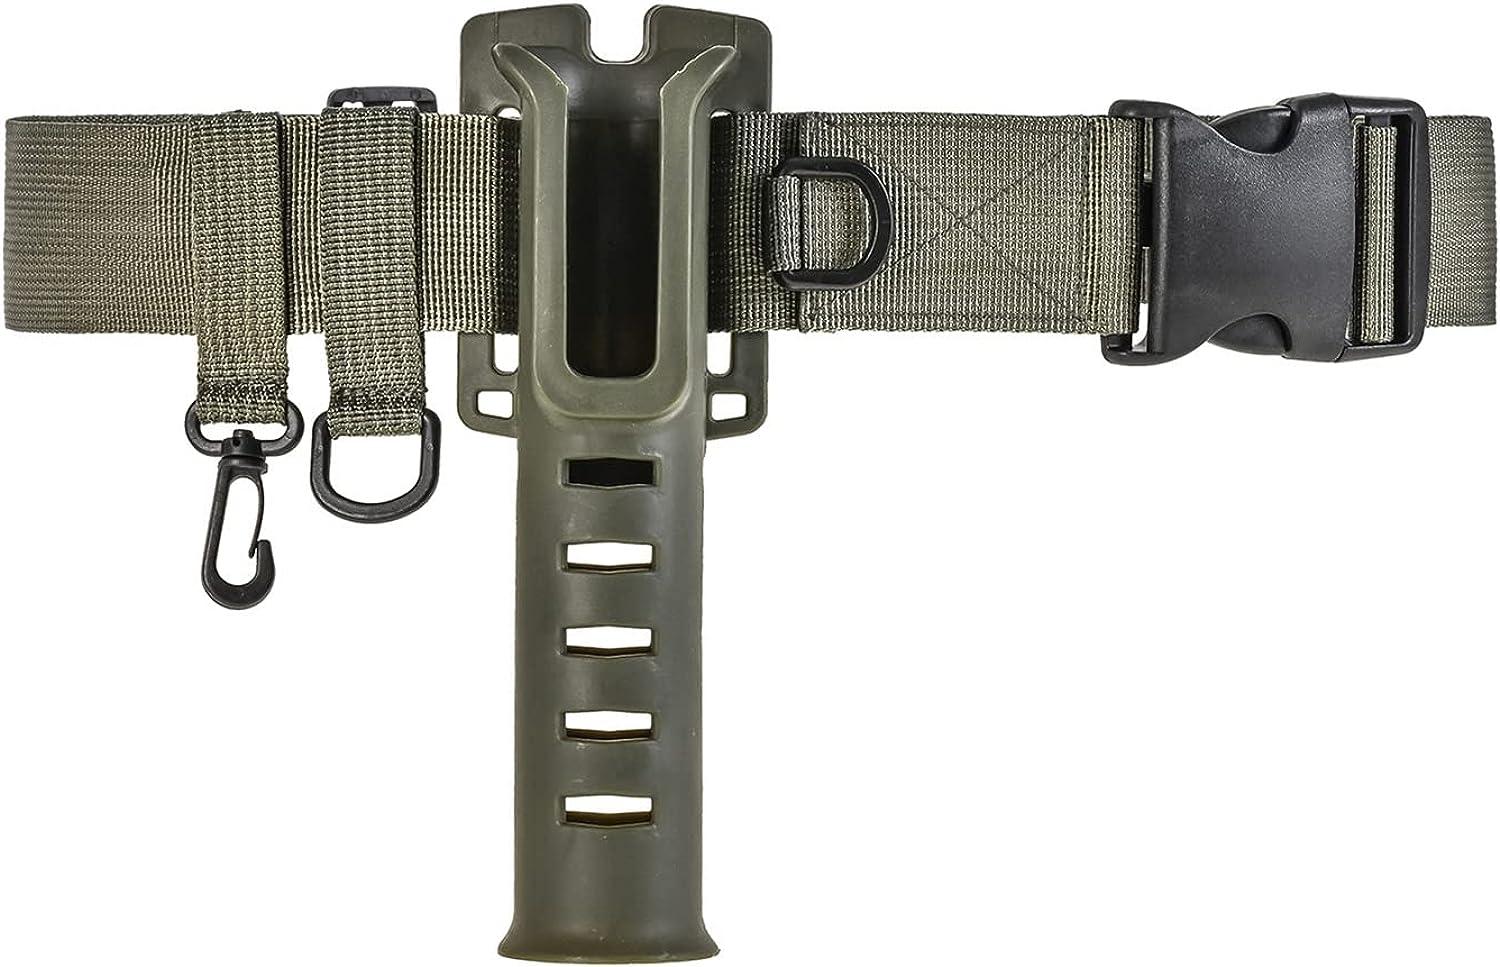 Fishing rod waist holder belt with buckles fishing gear and tools #fis